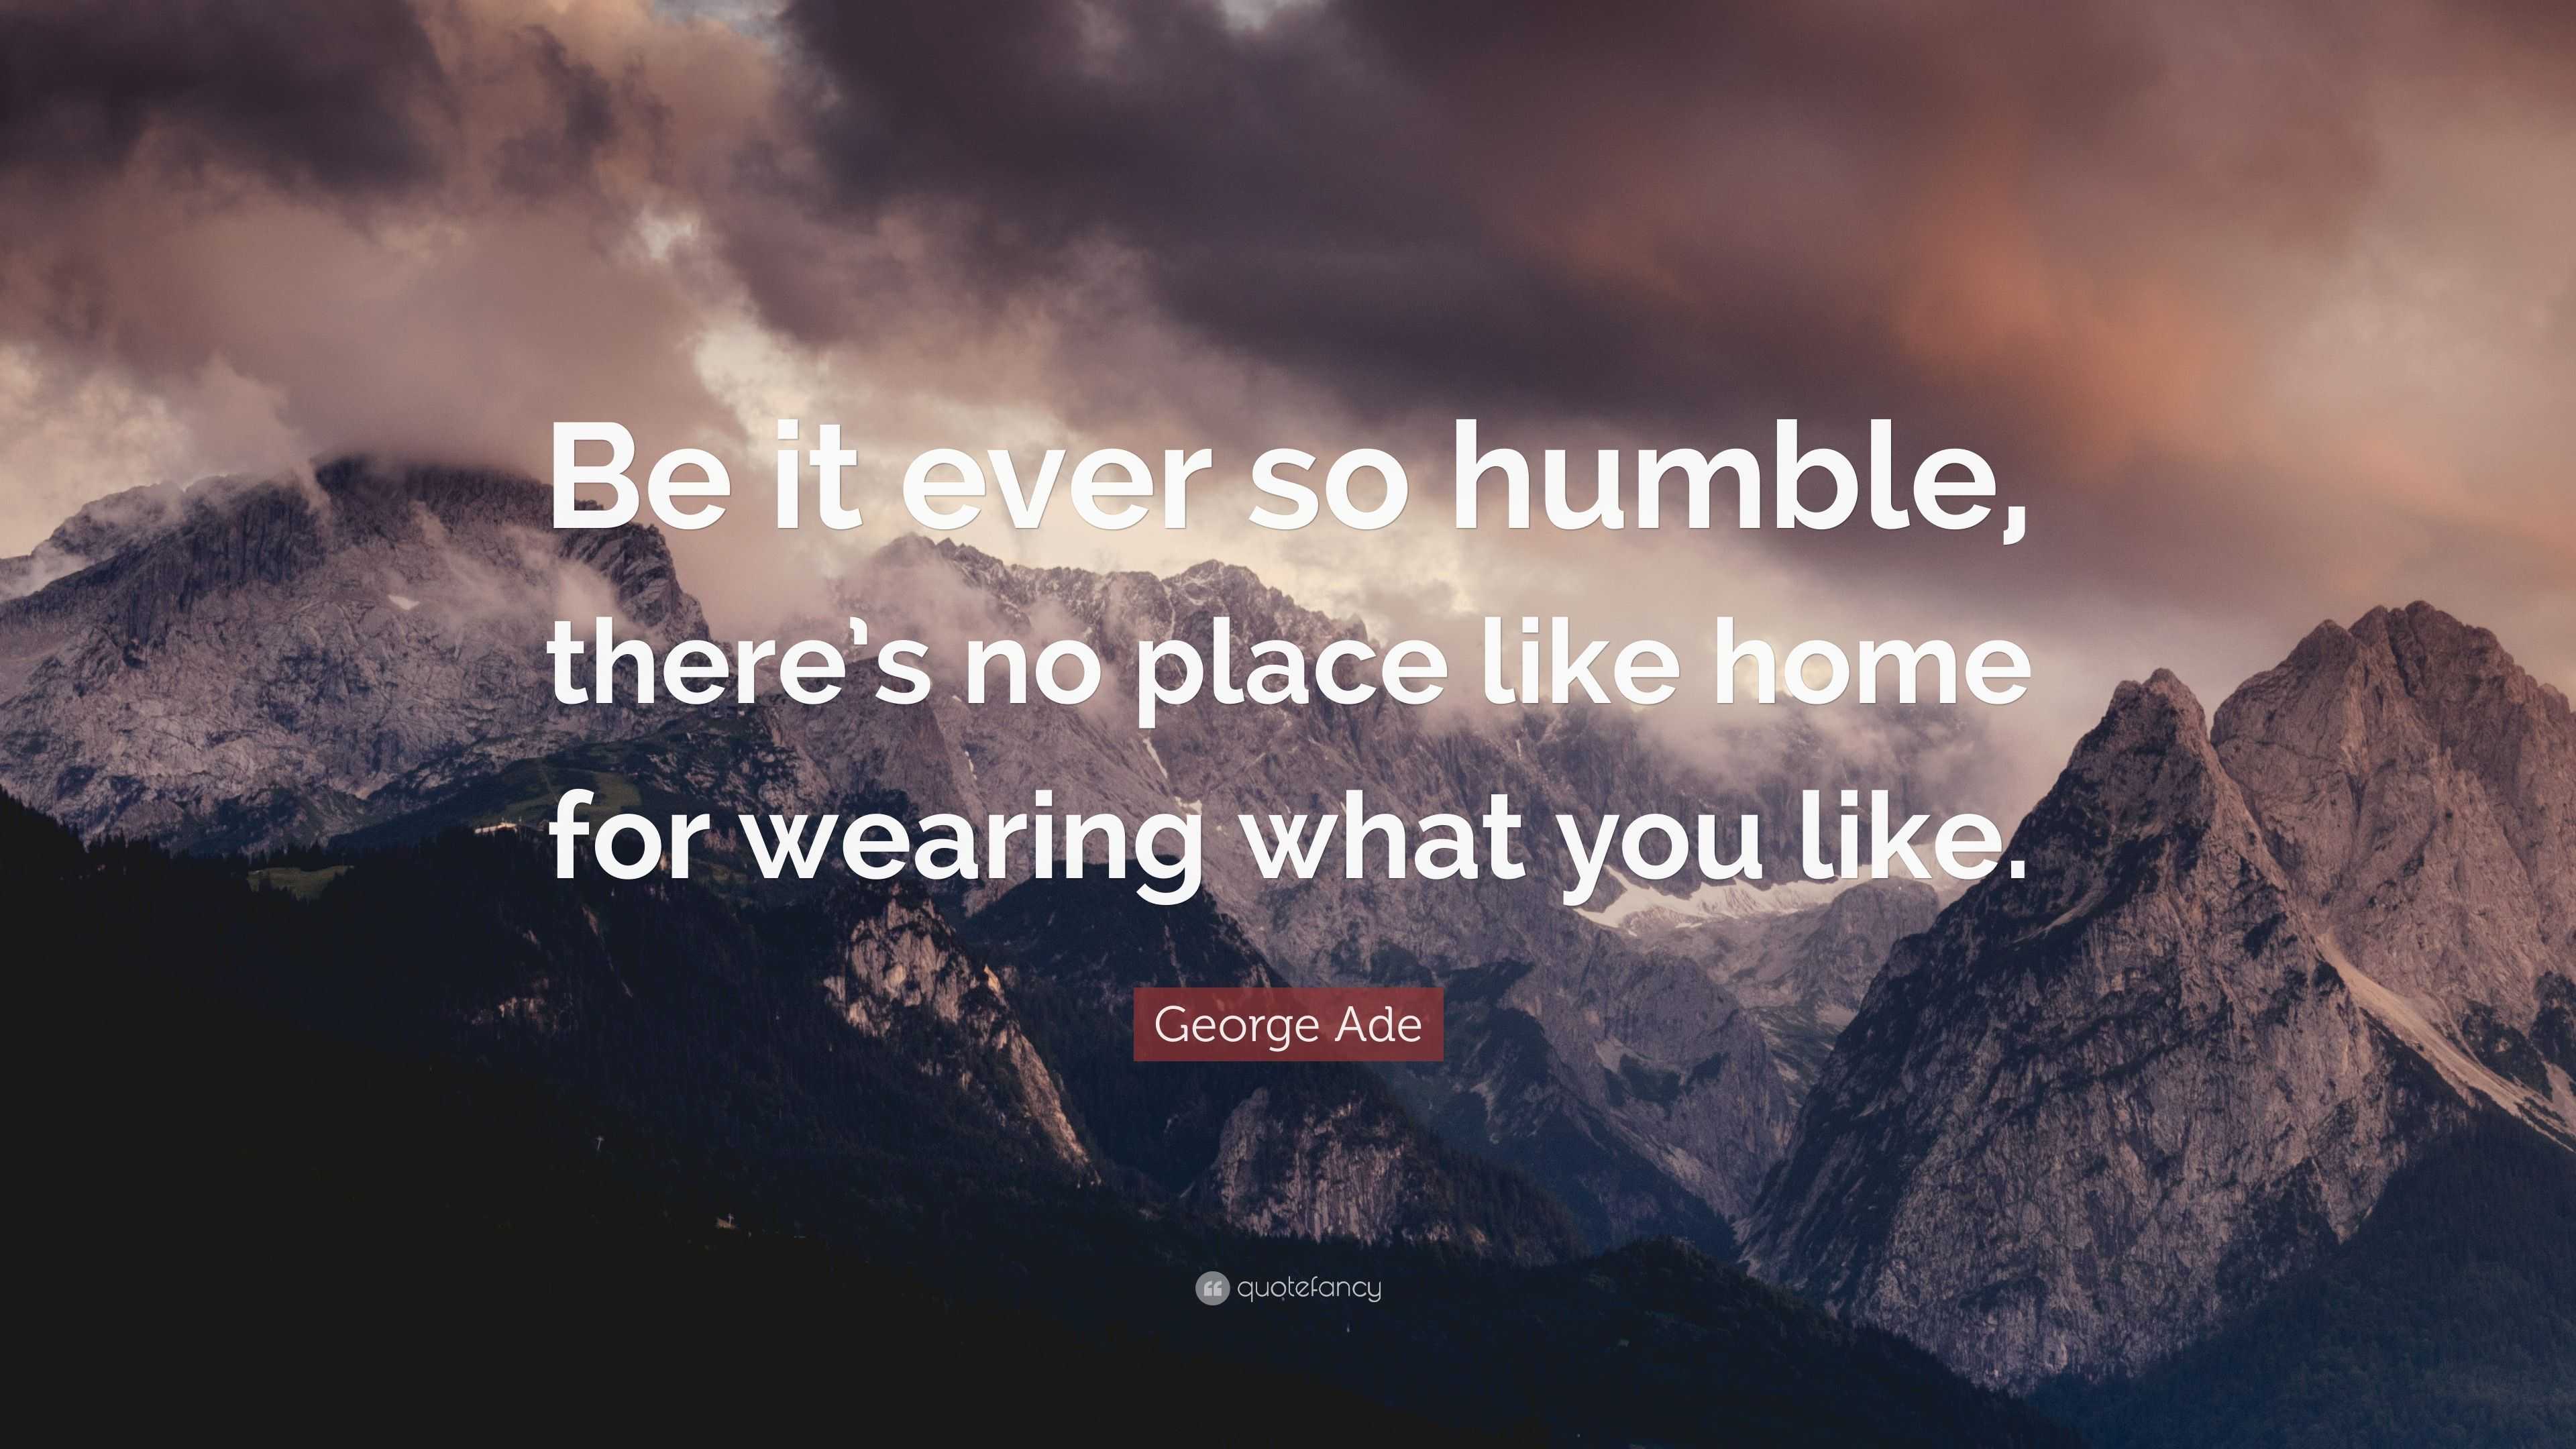 Be it ever so humble, there's no place like home.